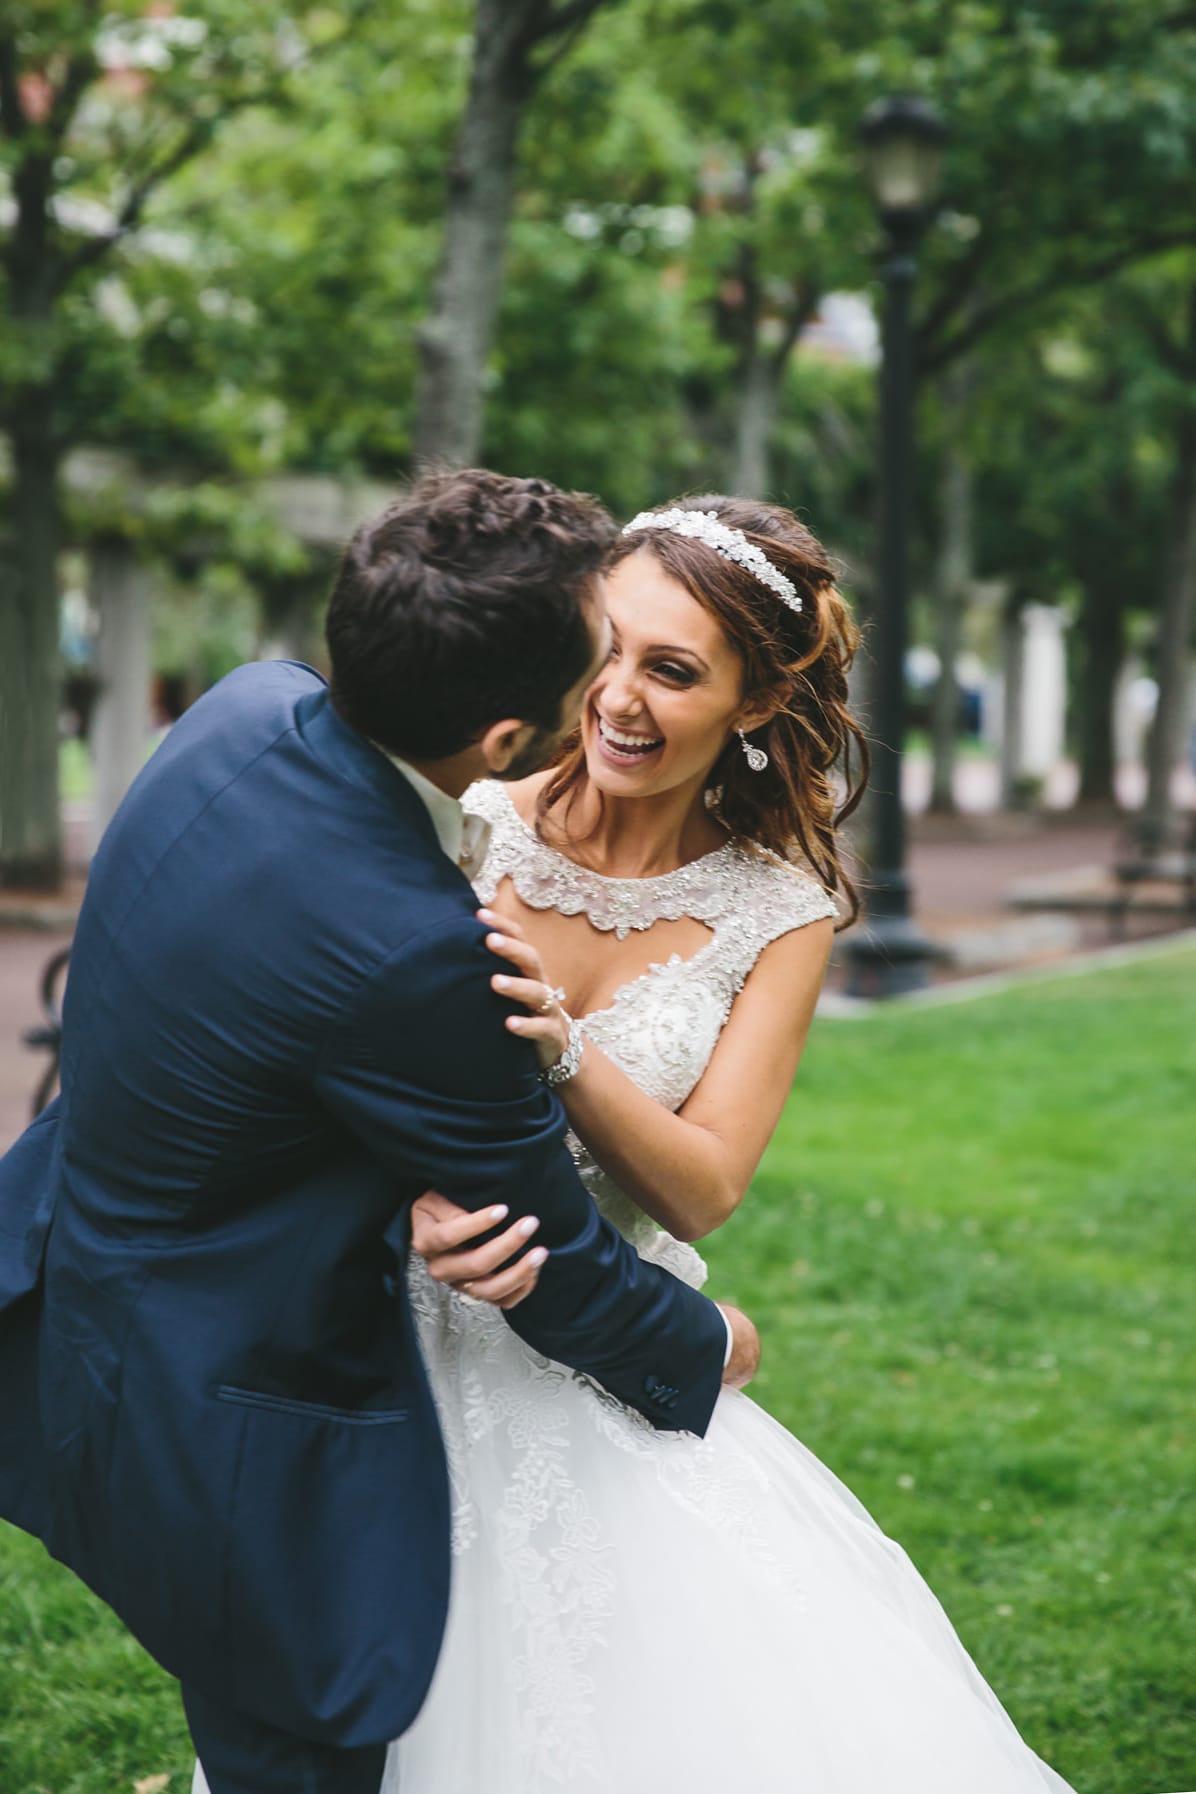 A documentary photograph of a bride and groom laughing together at the Boston Public Gardens during their State Room Wedding